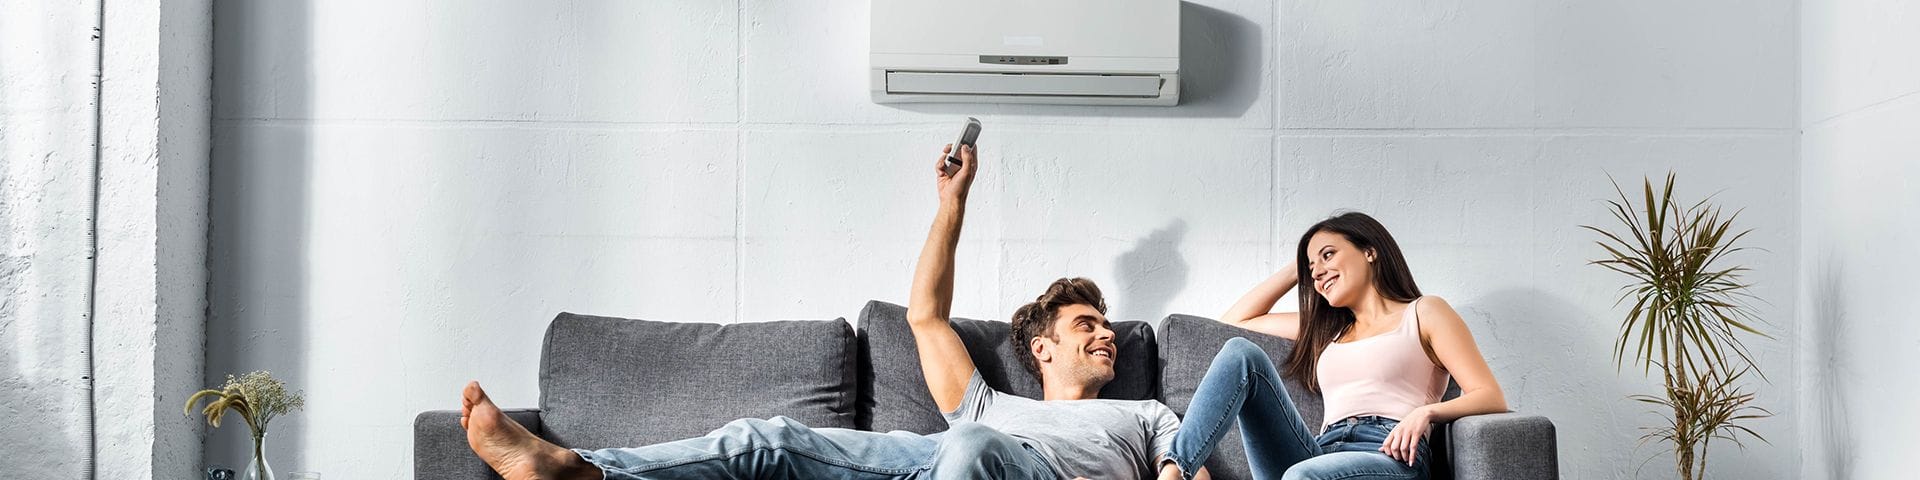 ProAire Heating & Cooling Pty Ltd